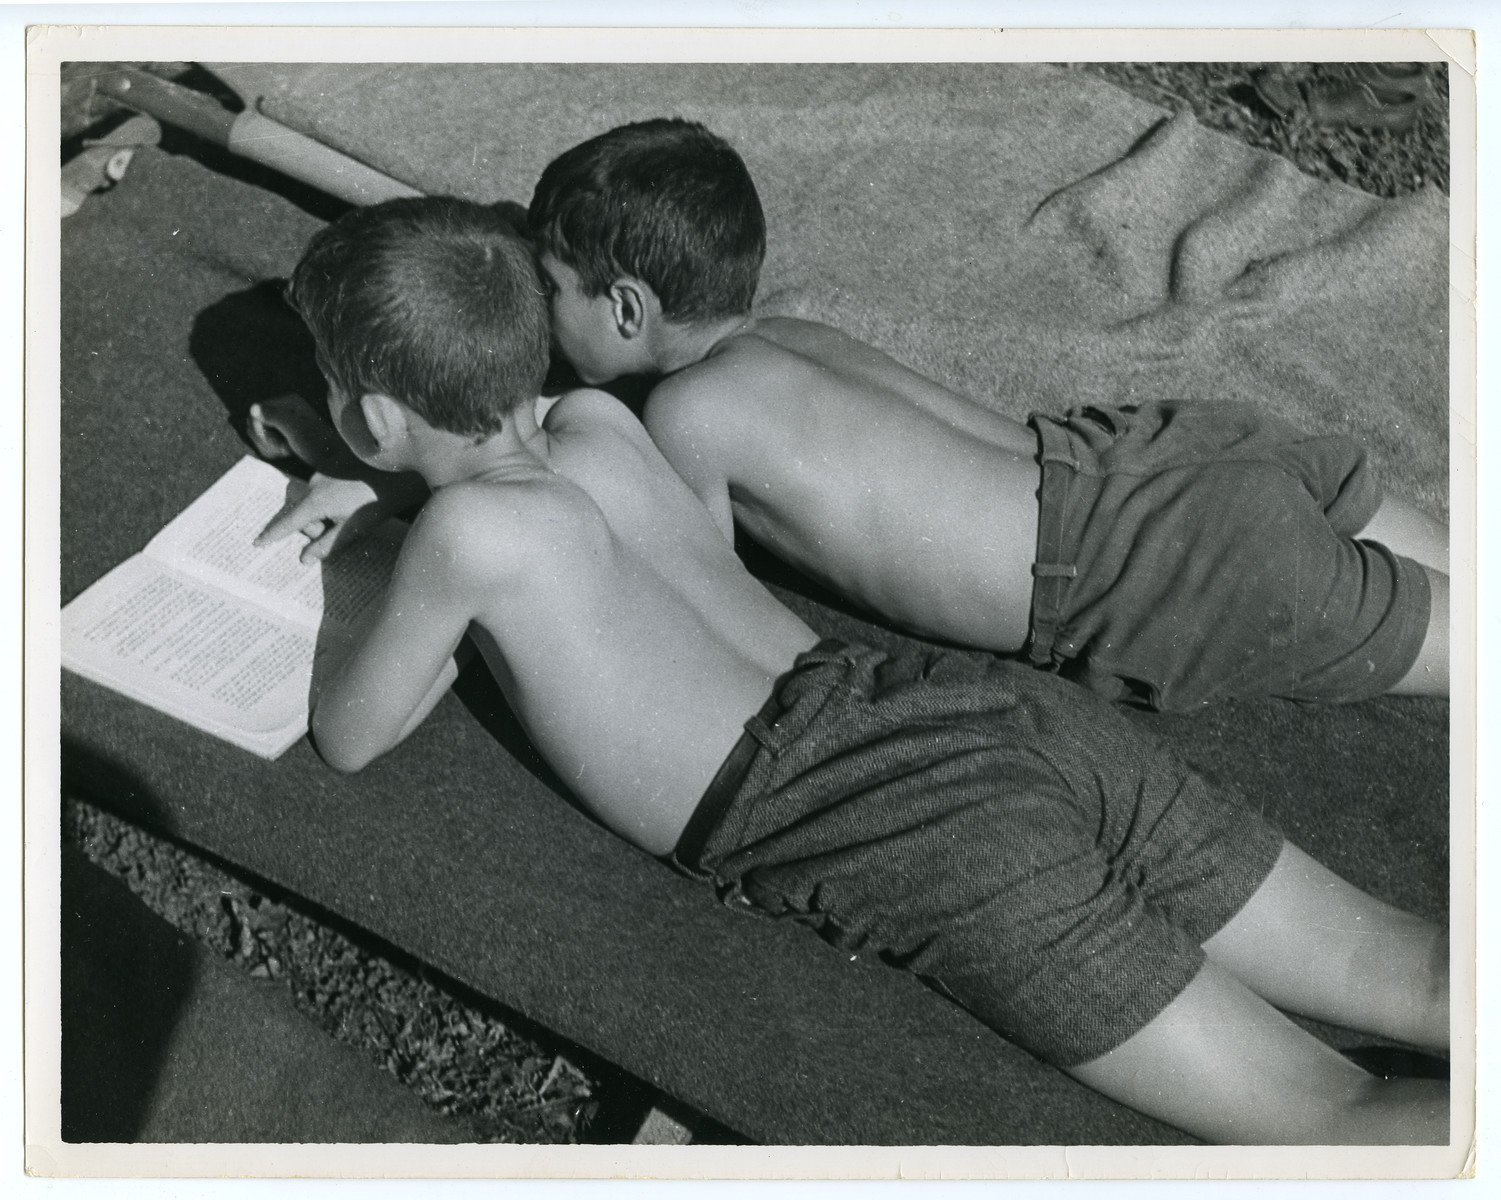 Two boys share a book in a displaced persons camp in Vienna.